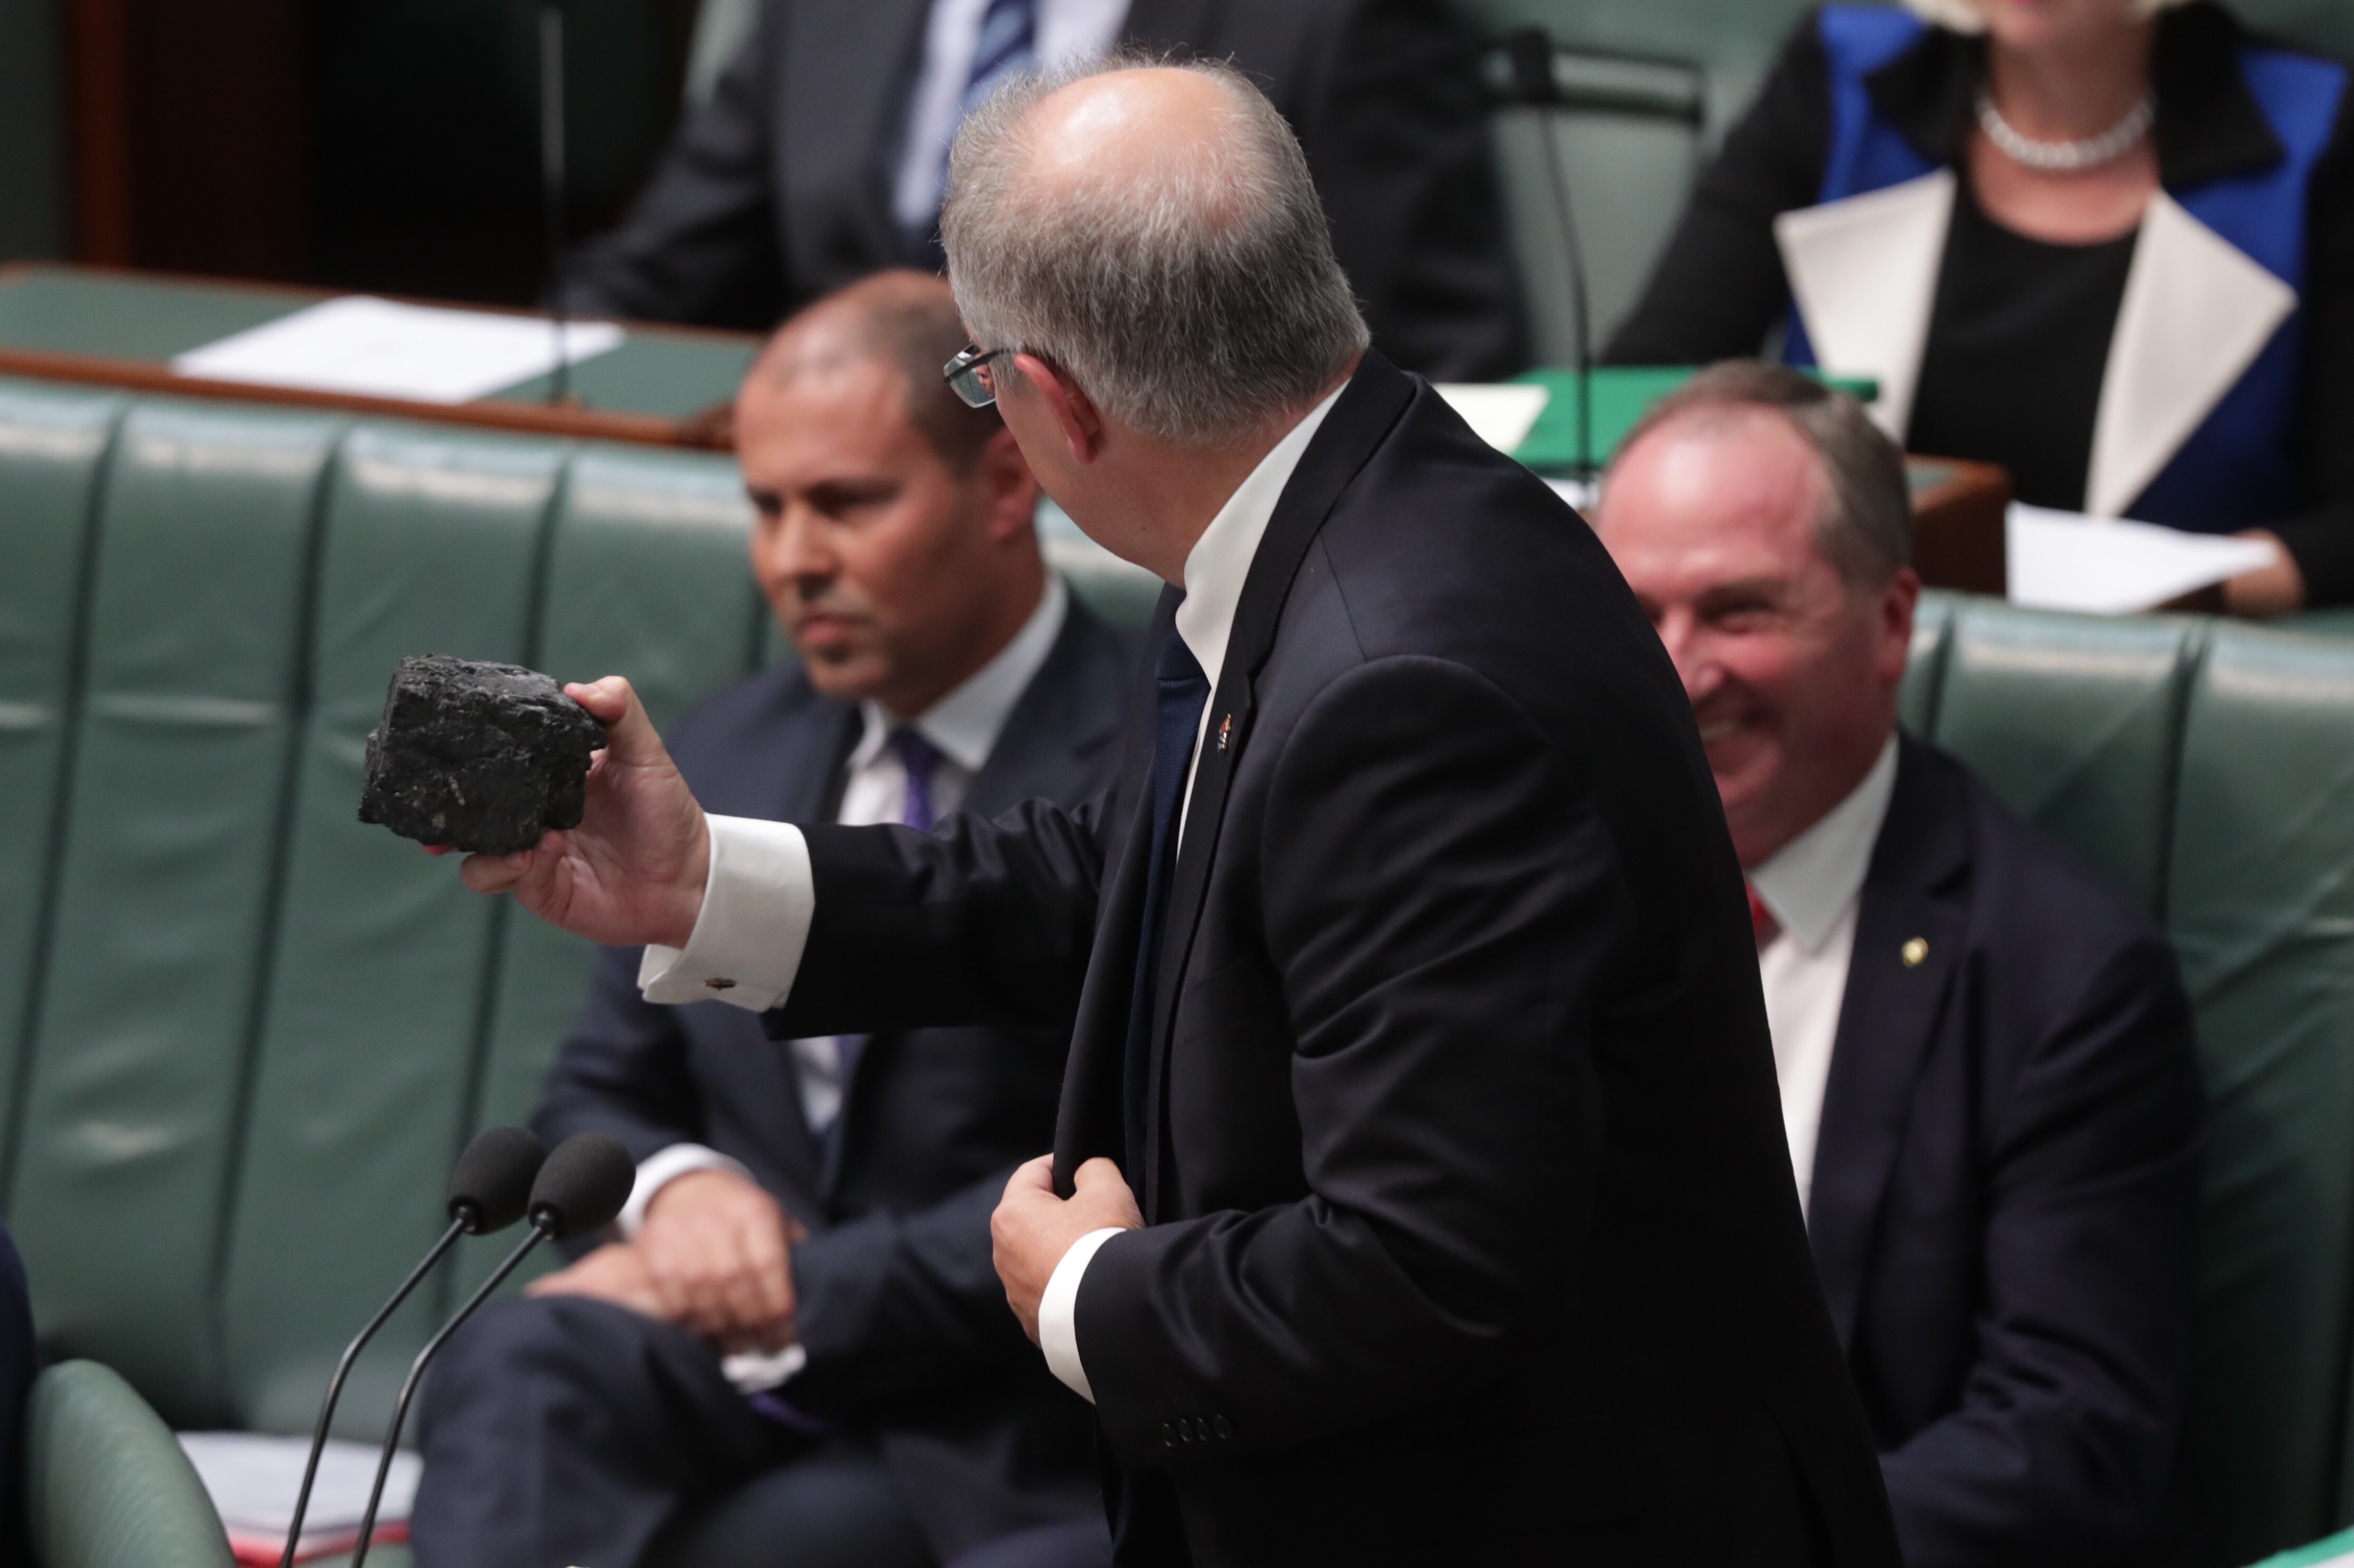 Treasurer Scott Morrison with a lump of coal during question time at Parliament House in Canberra on Thursday 9 February 2017. Photo: Andrew Meares